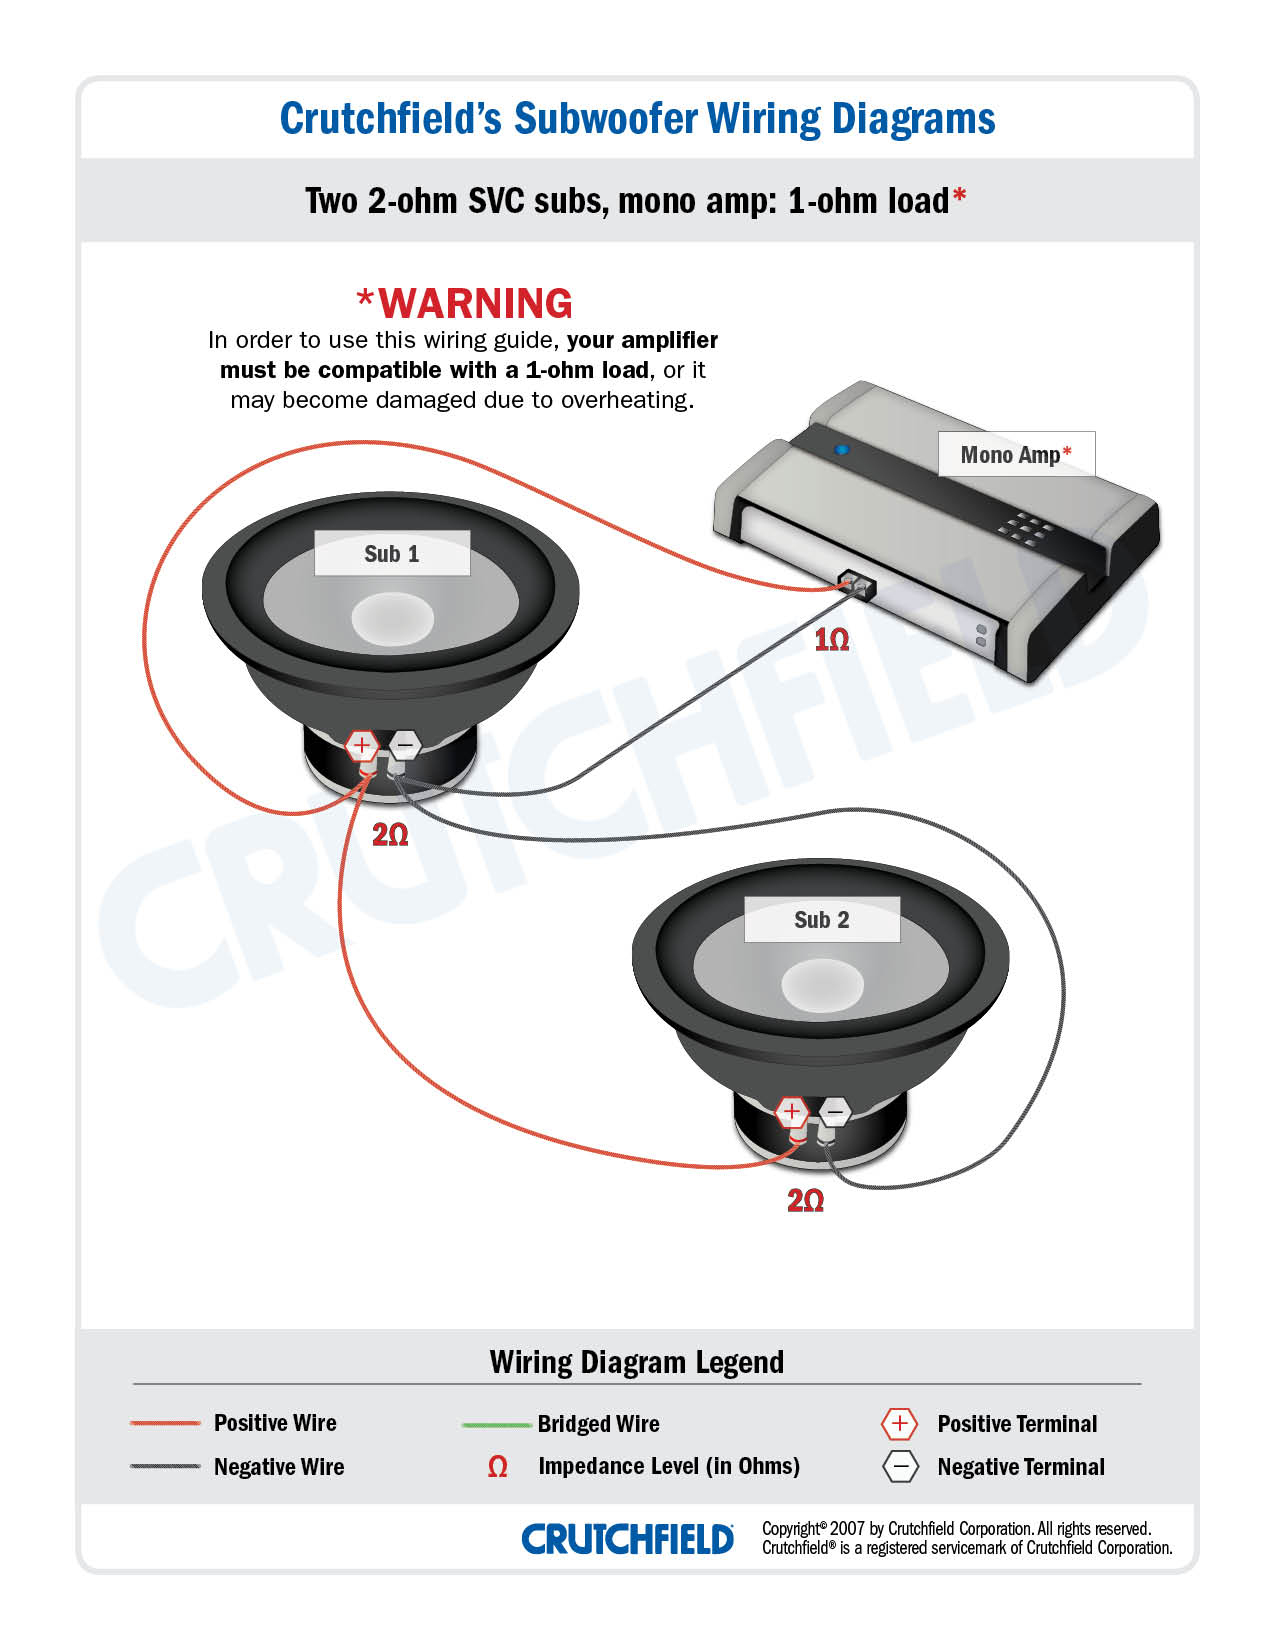 Subwoofer Wiring Diagrams — How To Wire Your Subs - Rockford Fosgate Wiring Diagram